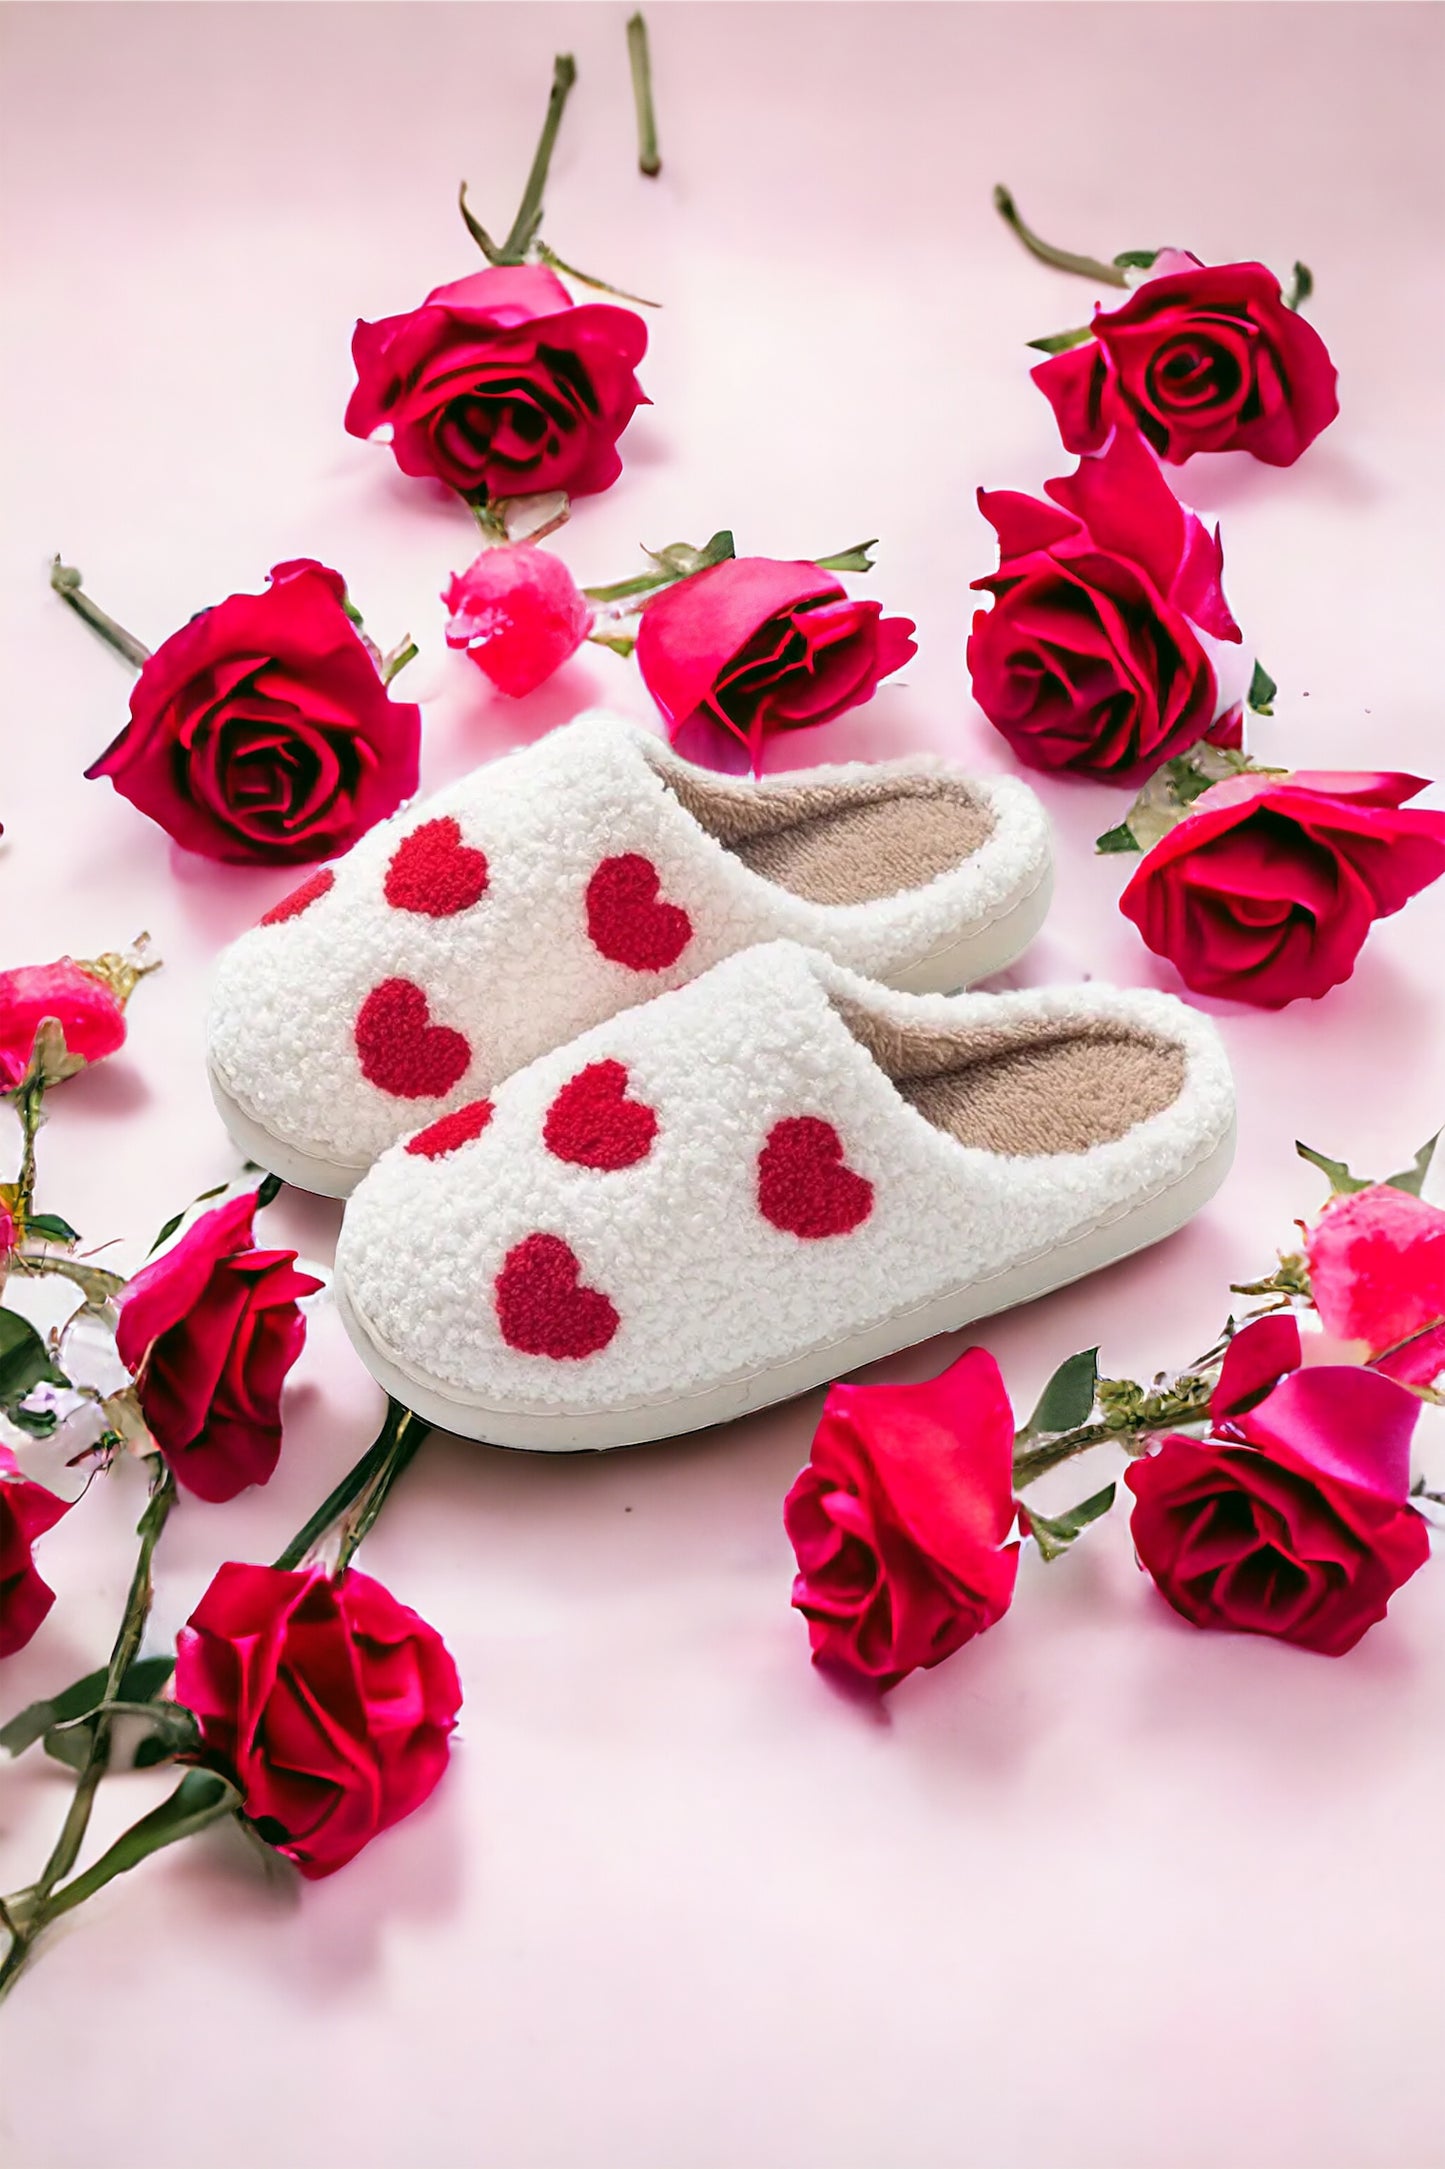 Cozy Heart Slippers For Her